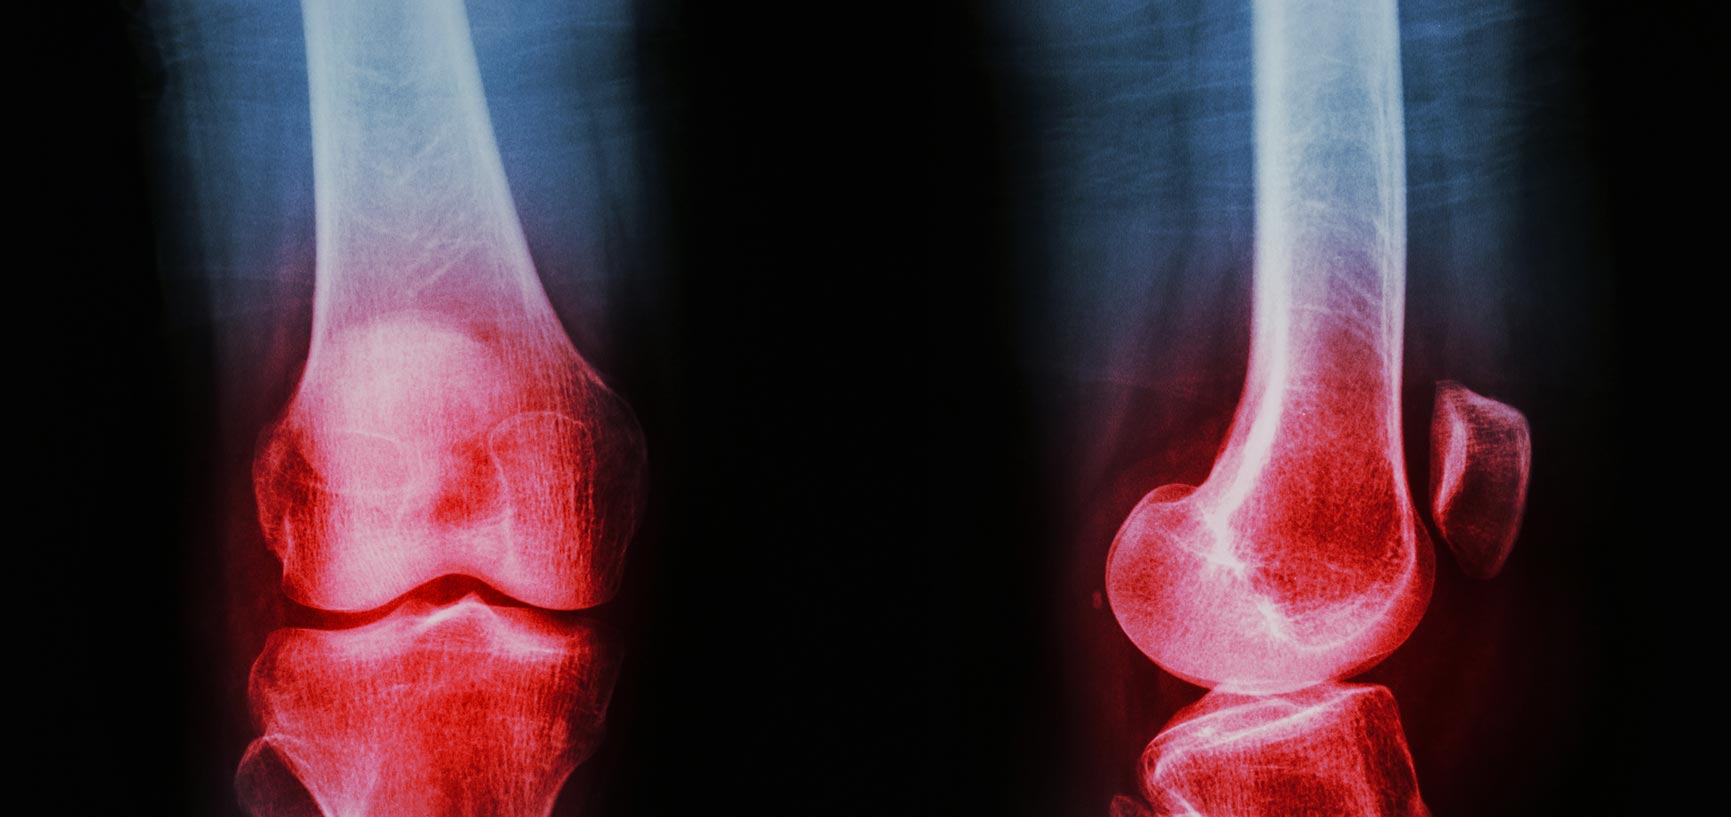 Osteoarthritis – Lifestyle Changes that Ease the Pain